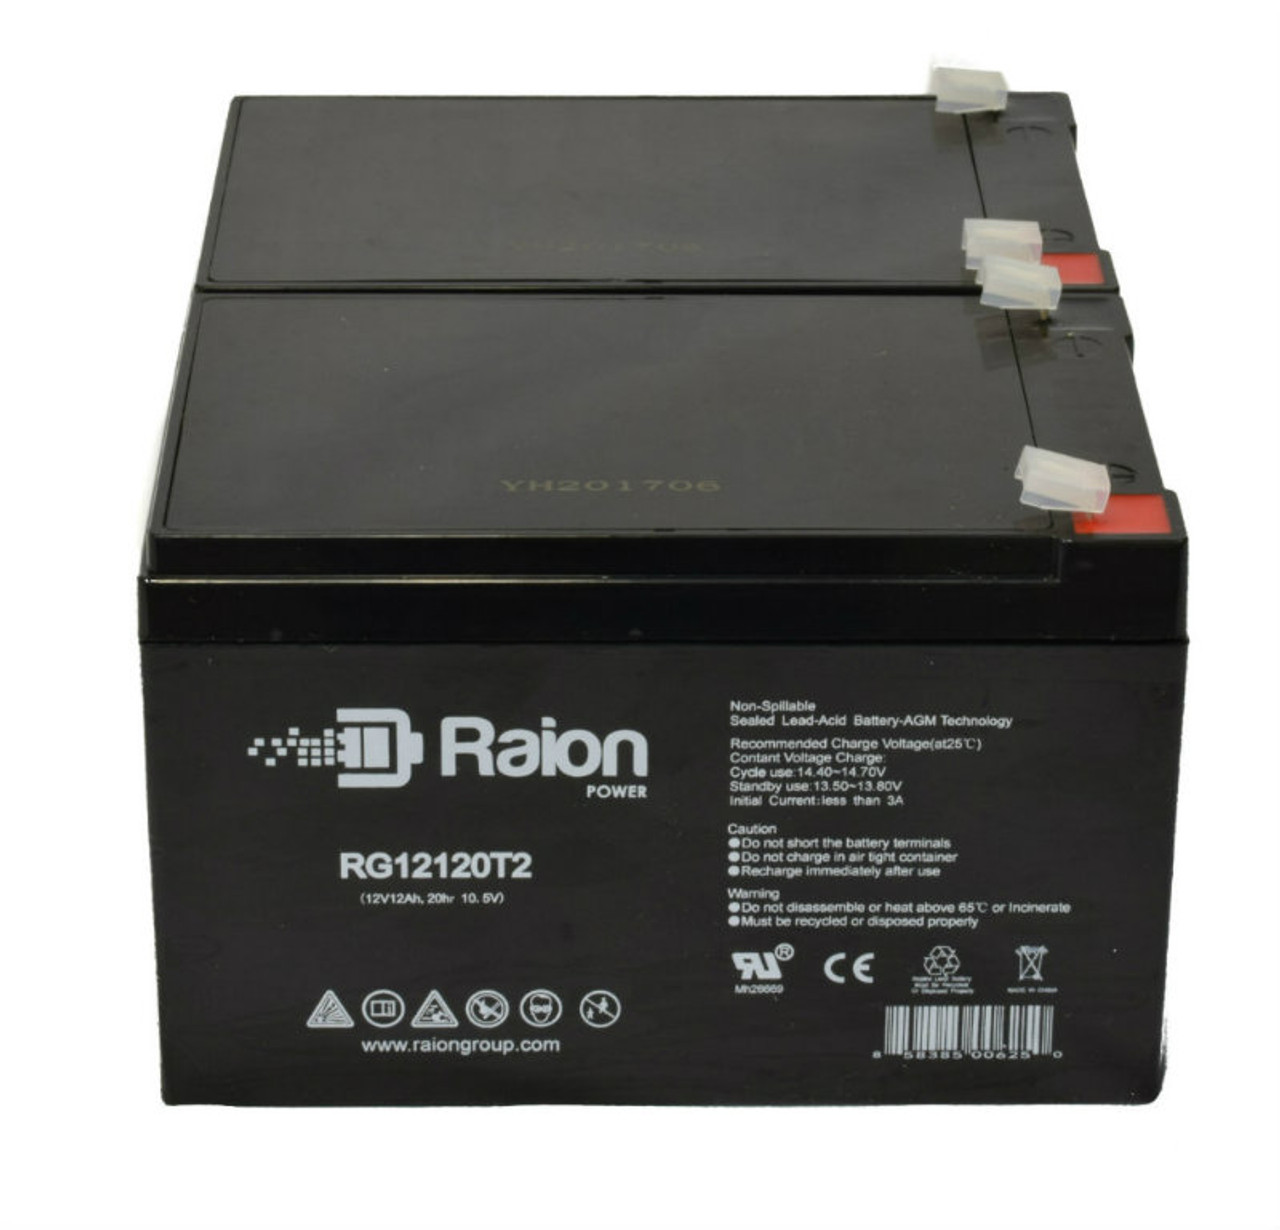 Raion Power 12V 12Ah Non-Spillable Compatible Replacement Battery for Strident AGM GP12-14 - (2 Pack)